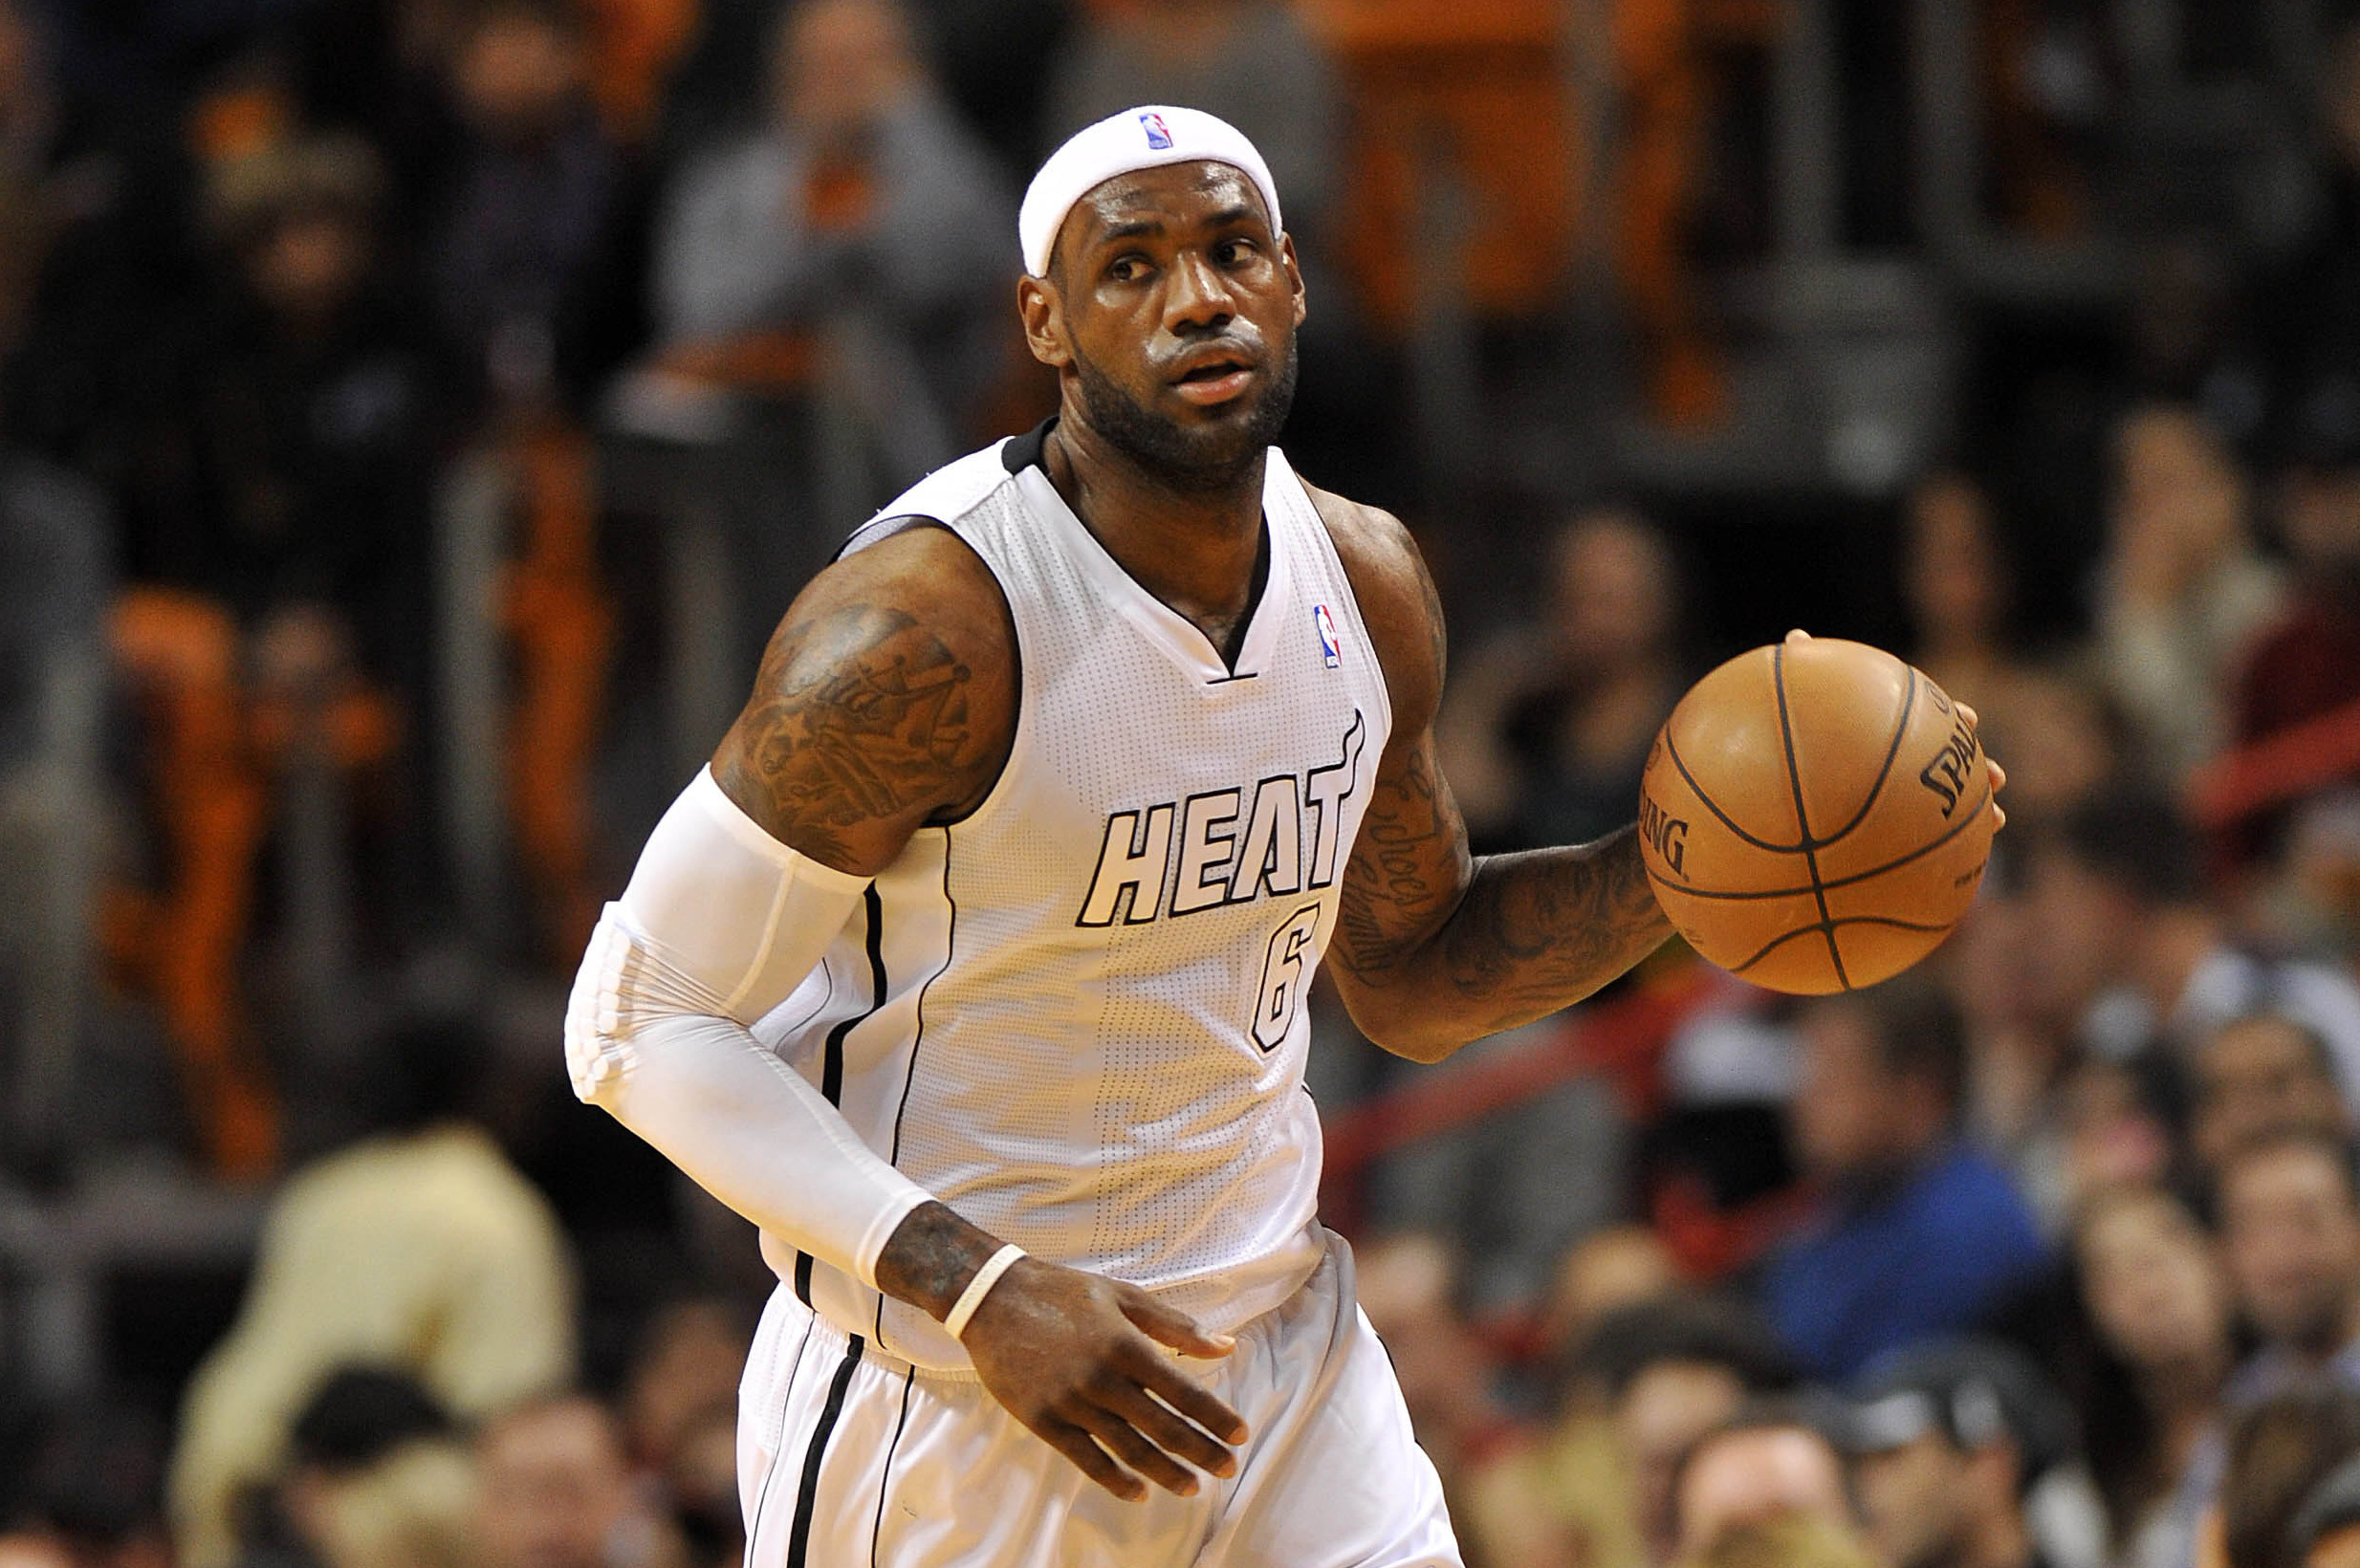 What's more unusual: Nicknames on jerseys or LeBron James fouling